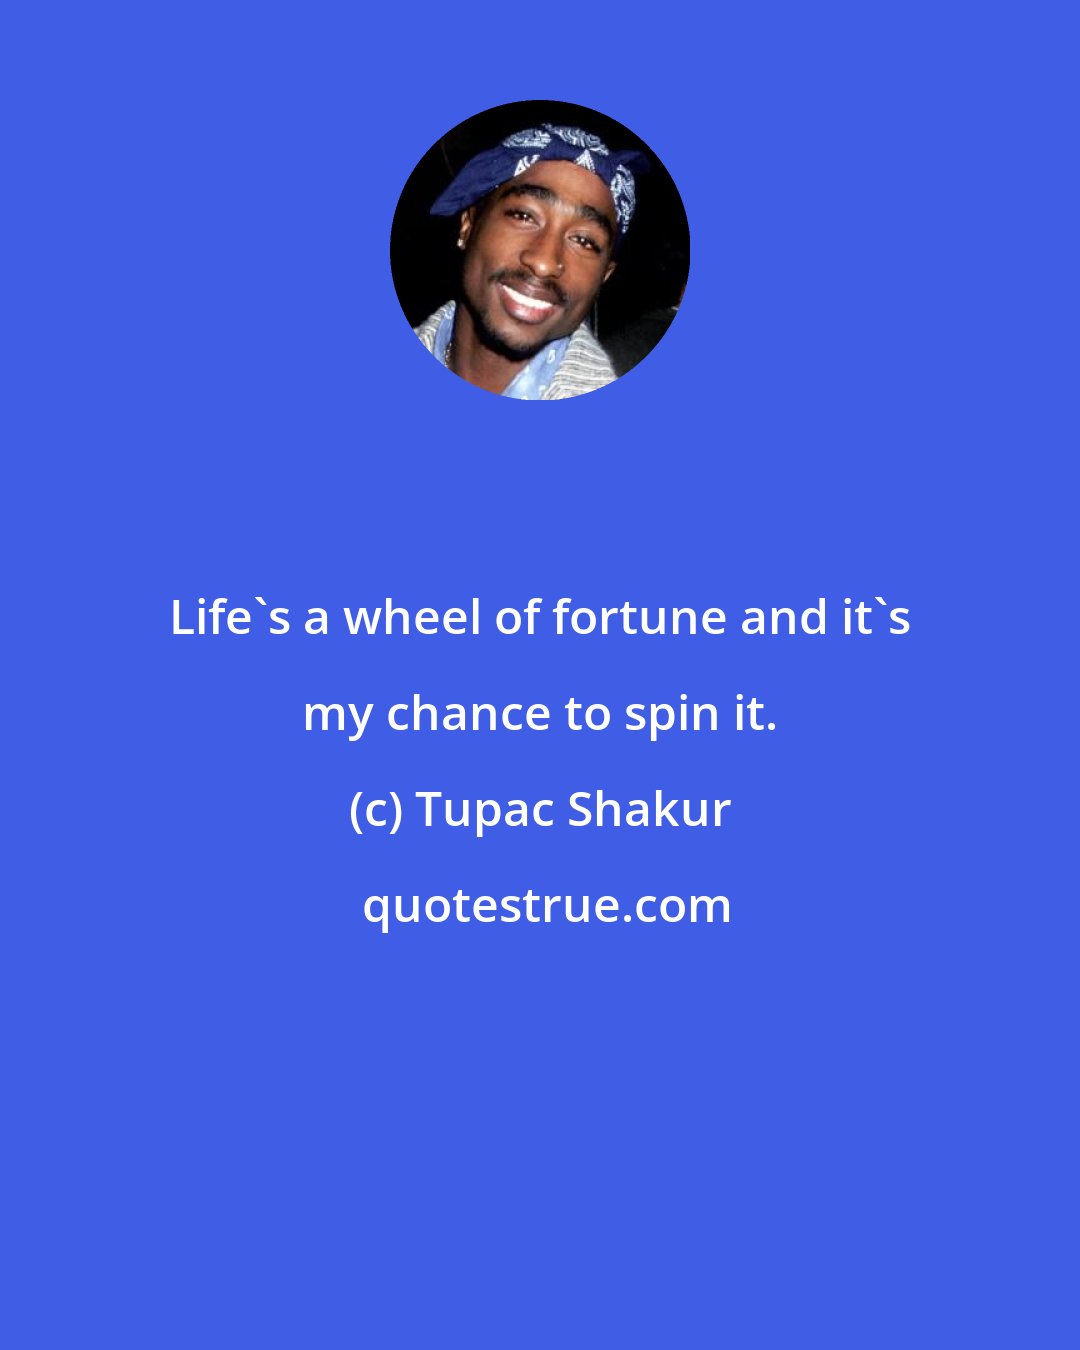 Tupac Shakur: Life's a wheel of fortune and it's my chance to spin it.